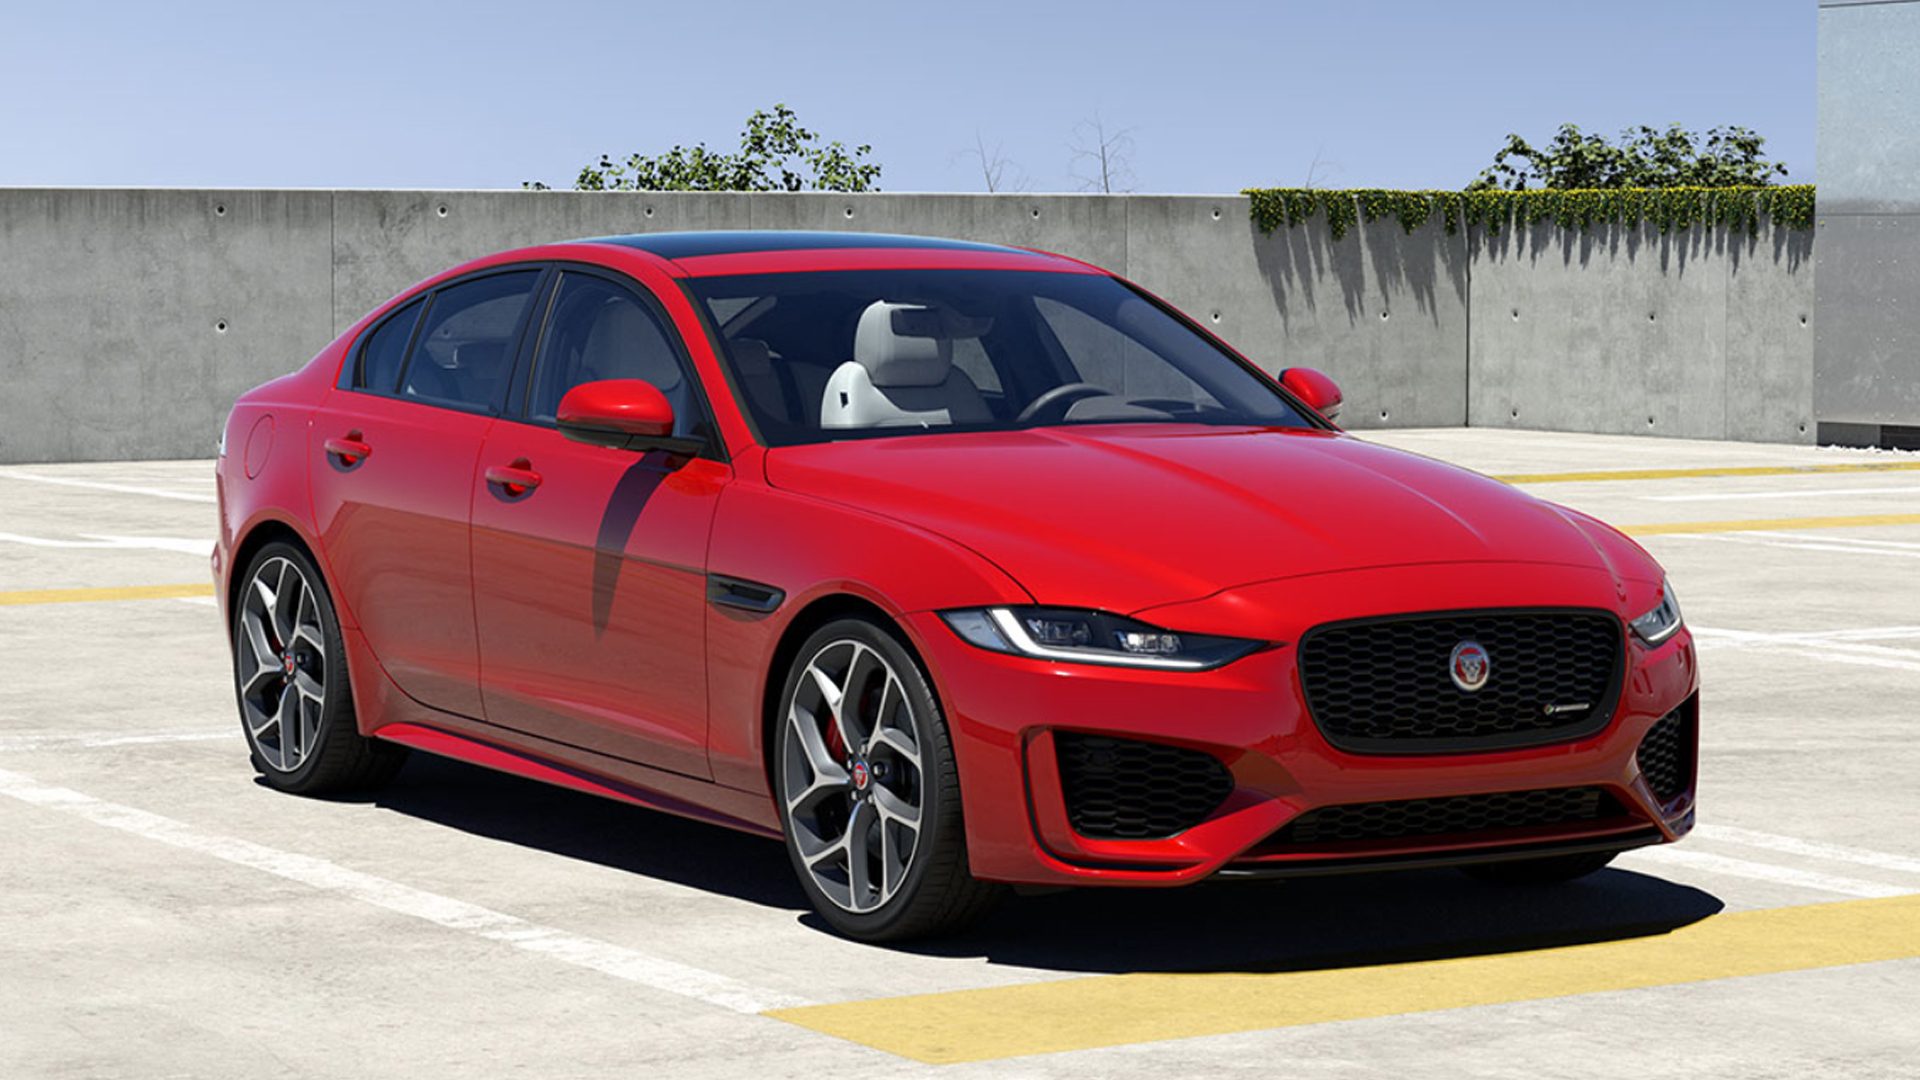 Jaguar XE 2020 - Price, Mileage, Reviews, Specification, Gallery ...